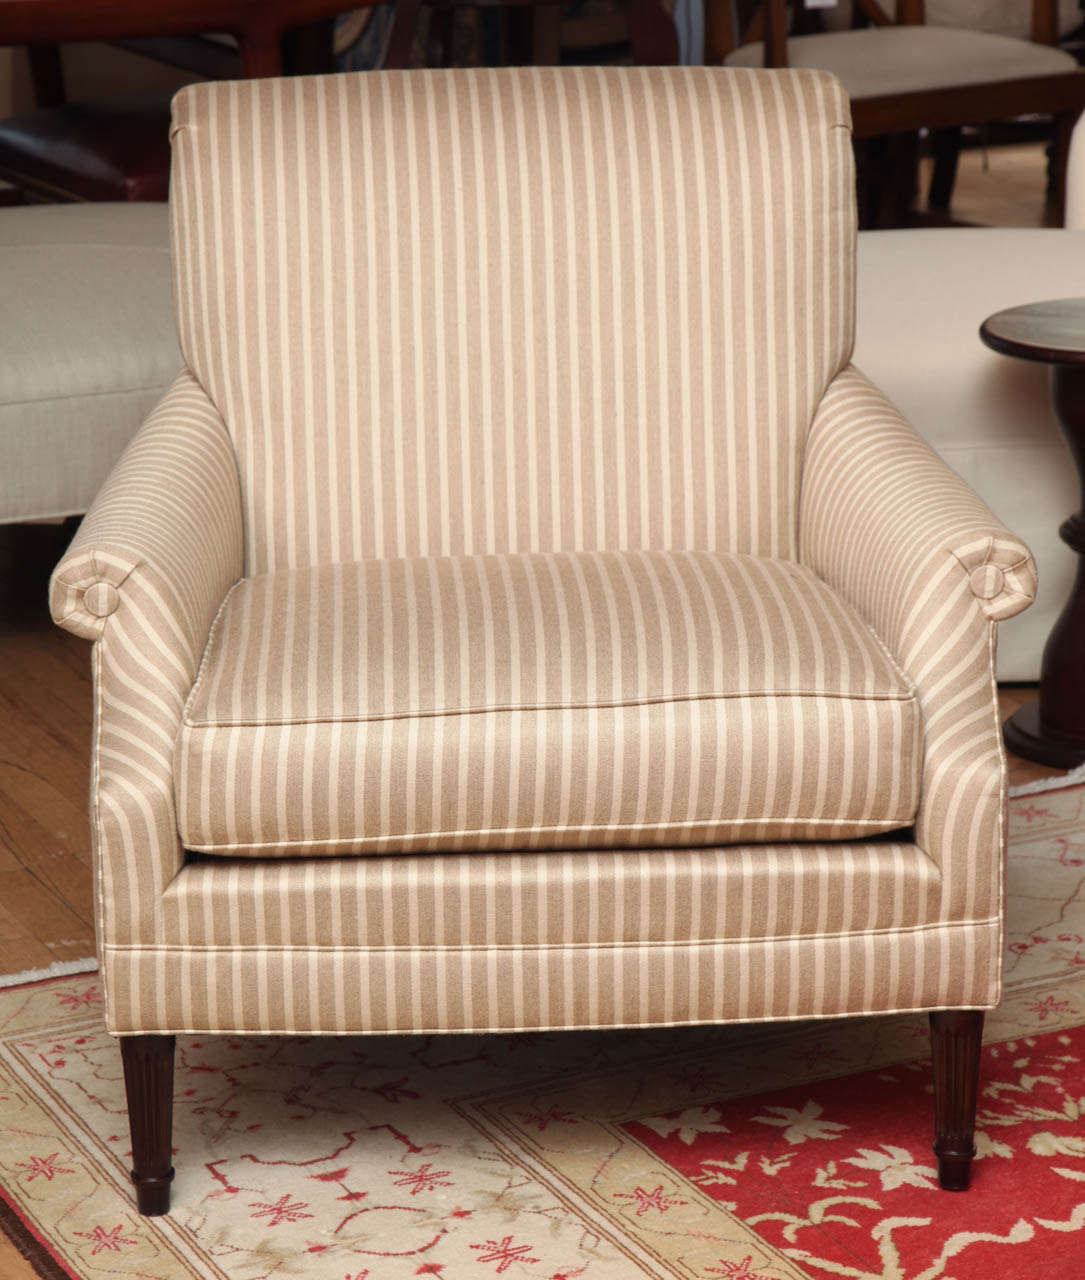 Audrey Lounge Chair by Mariette Himes Gomez for The Hickory Collection with Spring down Seat Cushion, Dark Walnut Legs, and Upholstered in a Beige on Beige Striped Sunbrella Fabric.